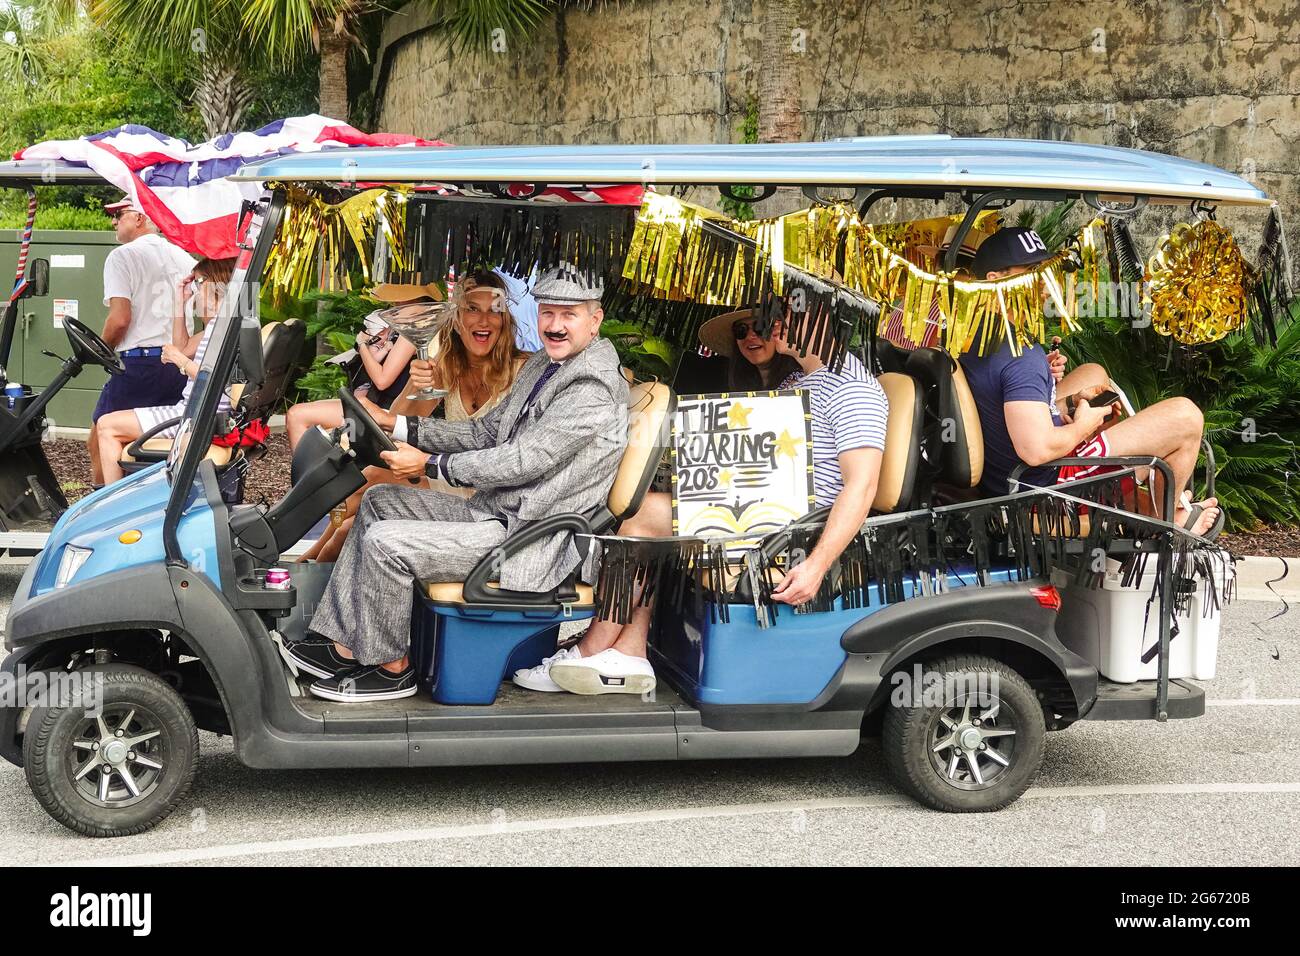 Sullivans Island, South Carolina, USA. 3rd July, 2021. A family drives their golf cart decorated in a Roaring Twenties theme during the annual Bicycle and Golf cart parade celebrating Independence Day July 3, 2021 in Sullivans Island, South Carolina. Credit: Planetpix/Alamy Live News Stock Photo